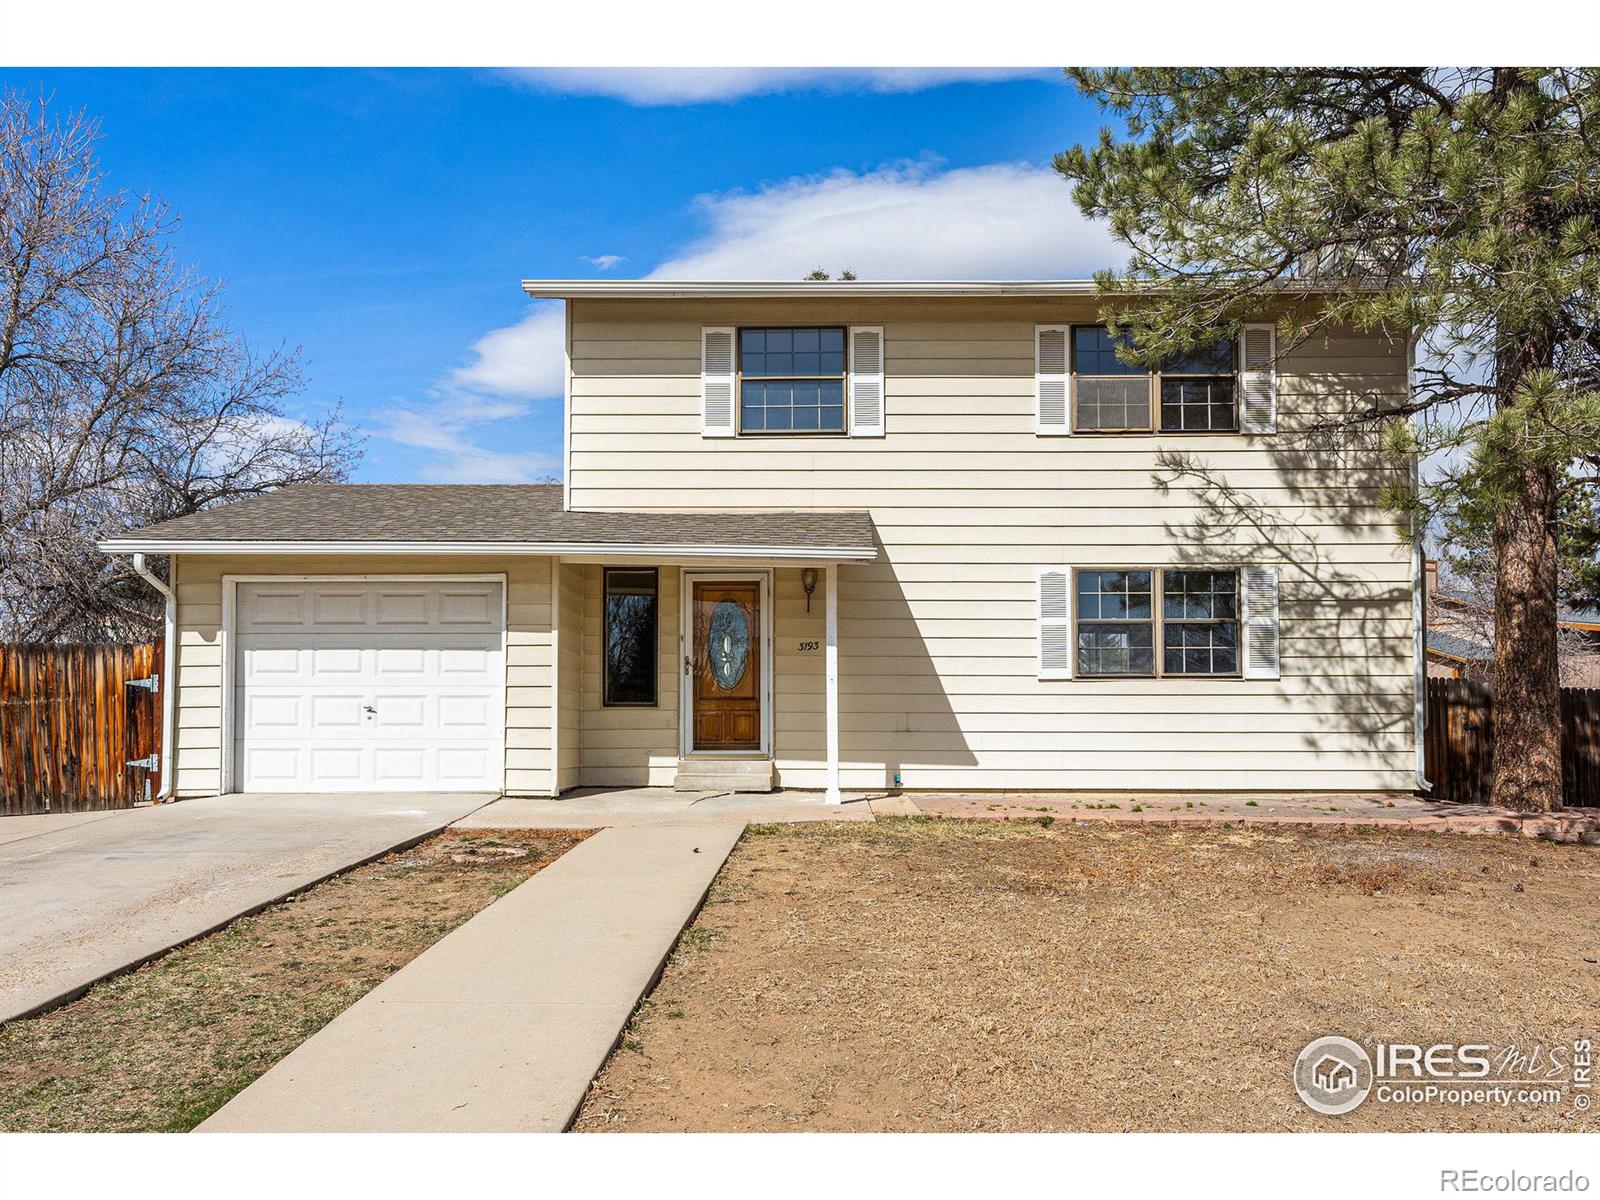 Report Image for 3193 W 134th Circle,Broomfield, Colorado